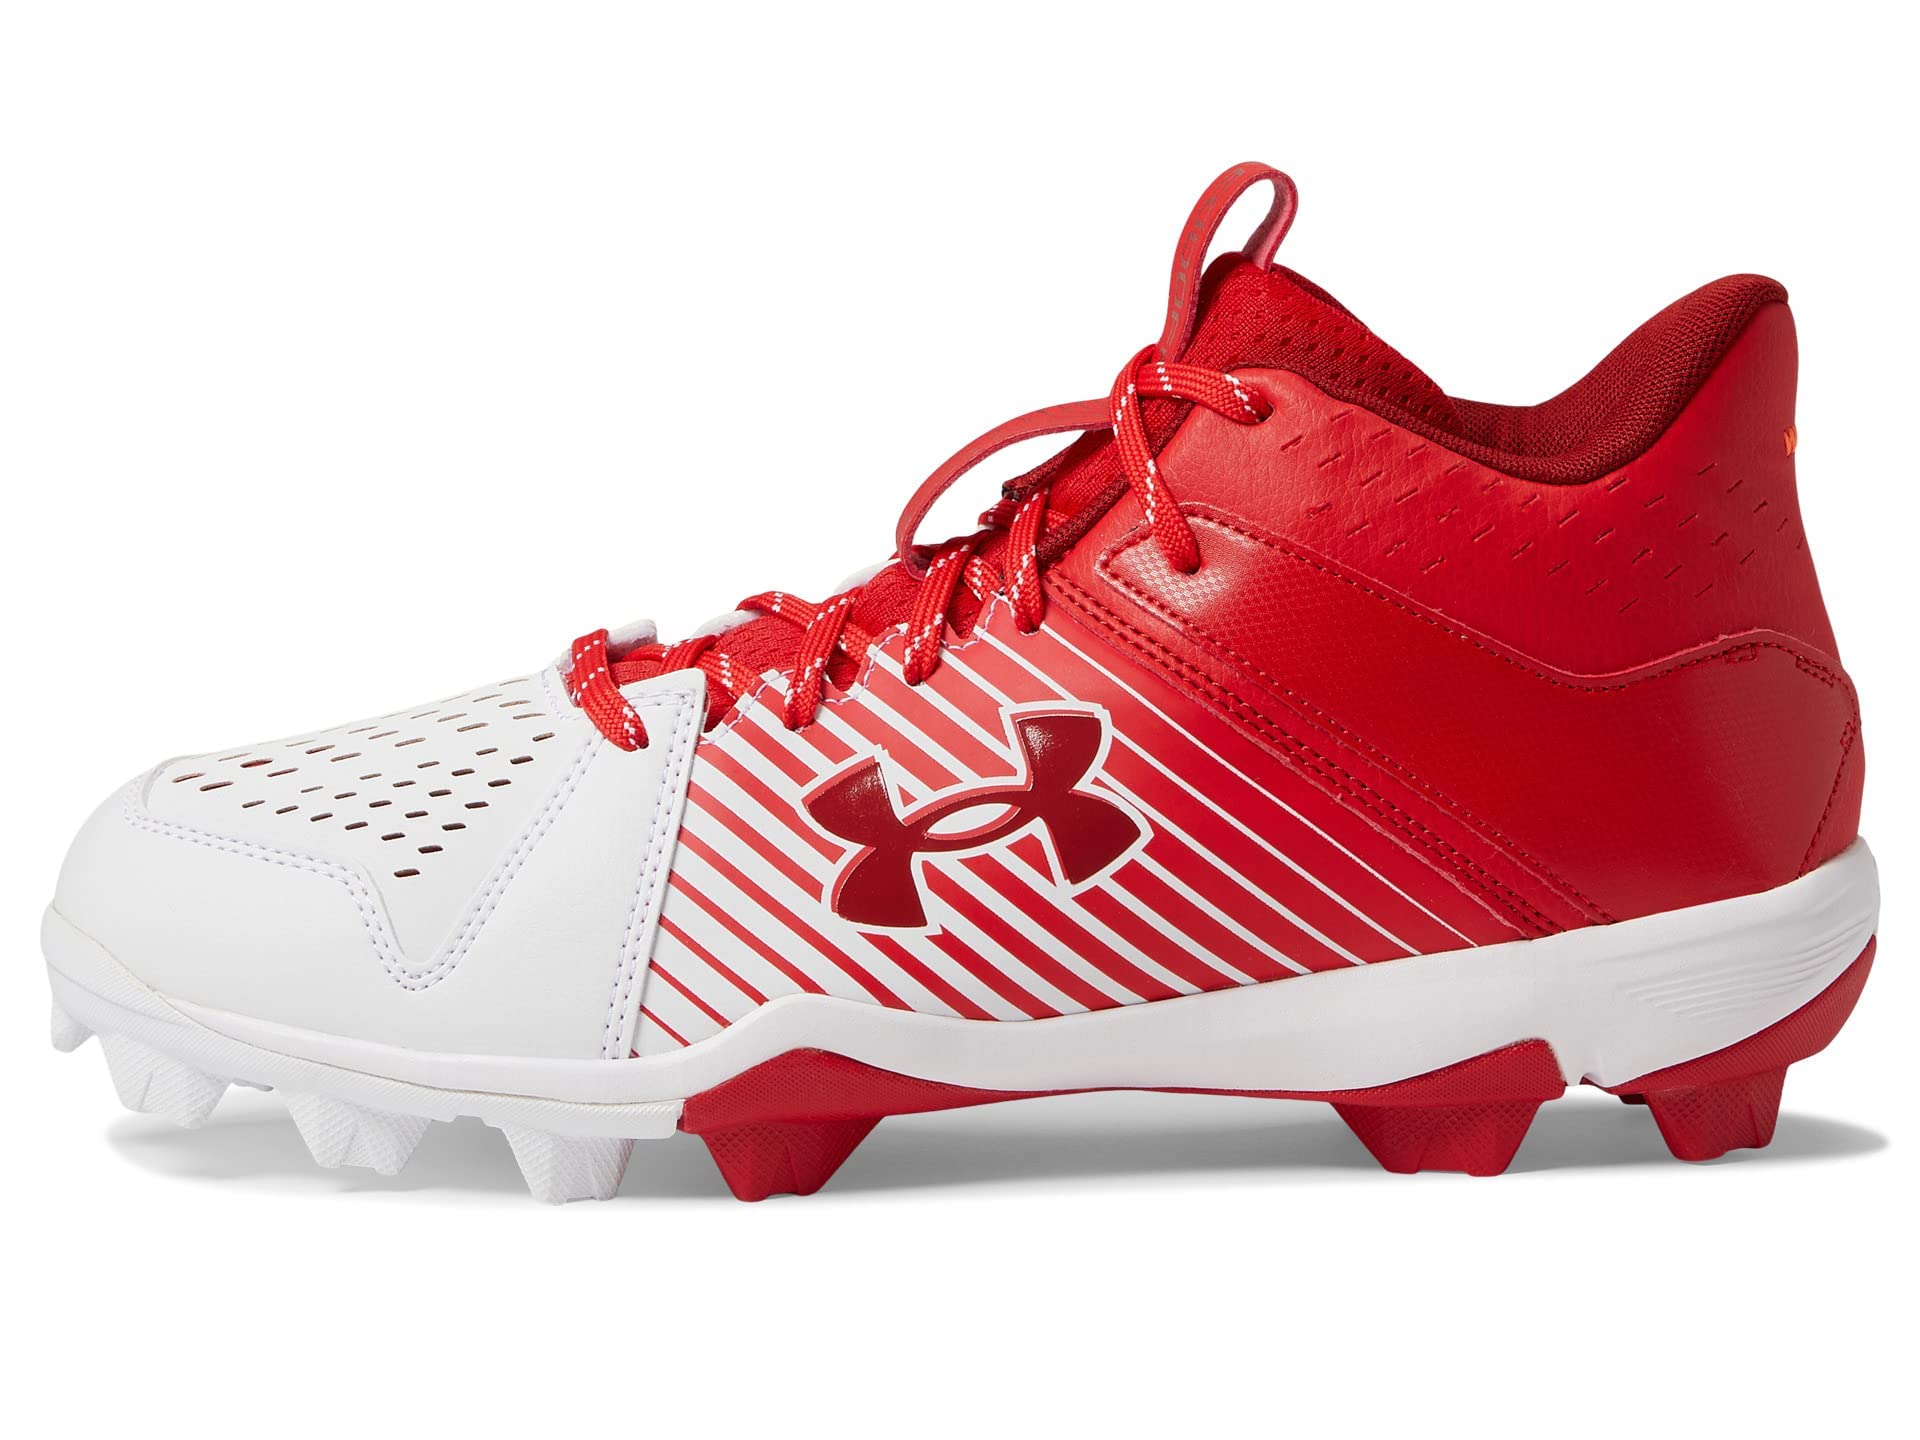 Under Armour Men's Leadoff Mid Rubber Molded Baseball Cleat Shoe